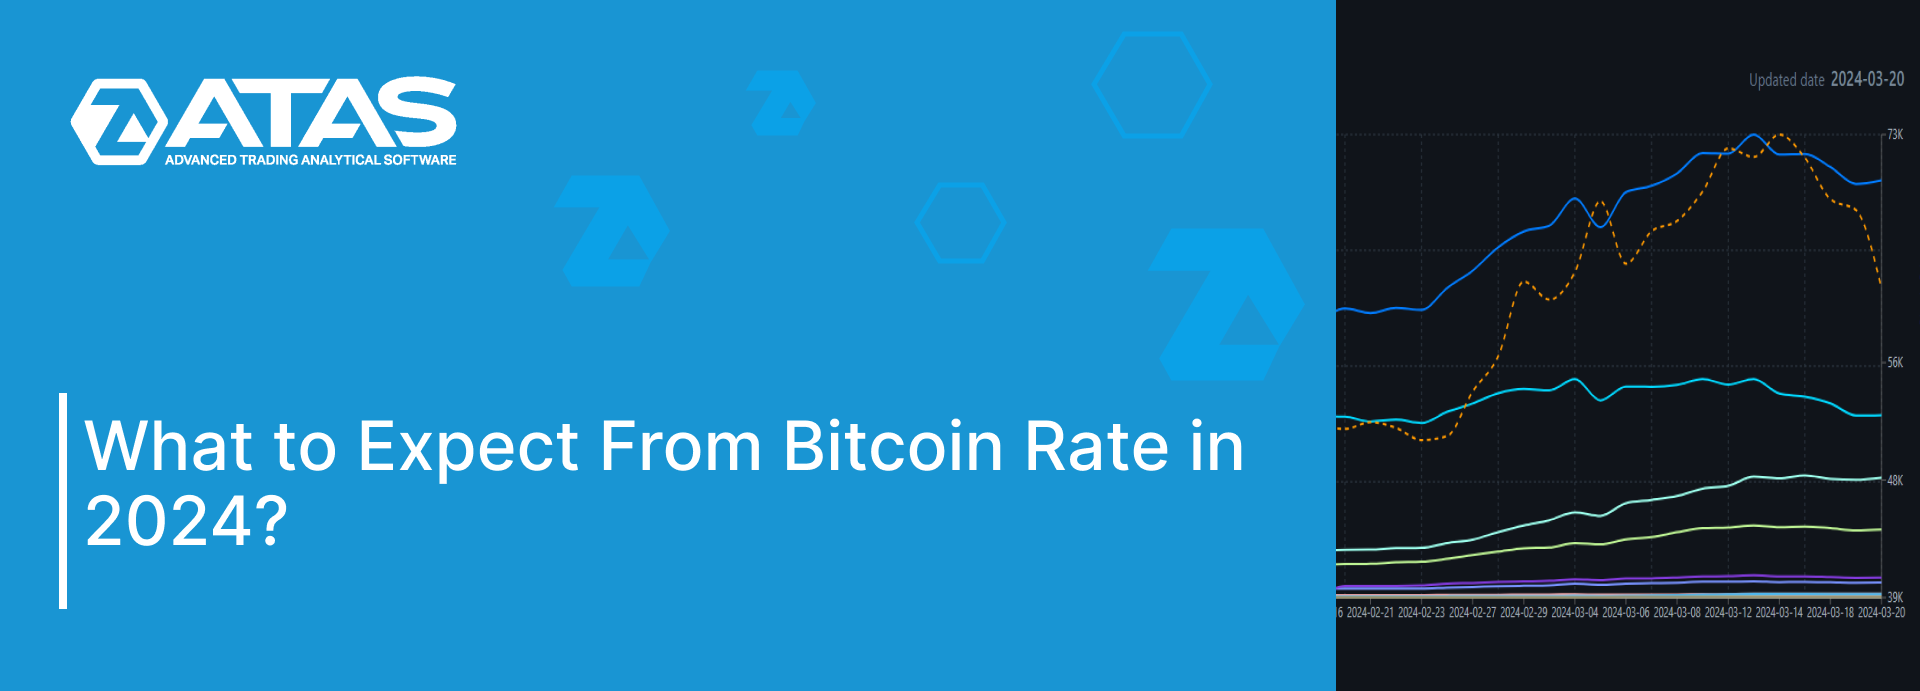 Bitcoin Rate in 2024 - Expert Predictions